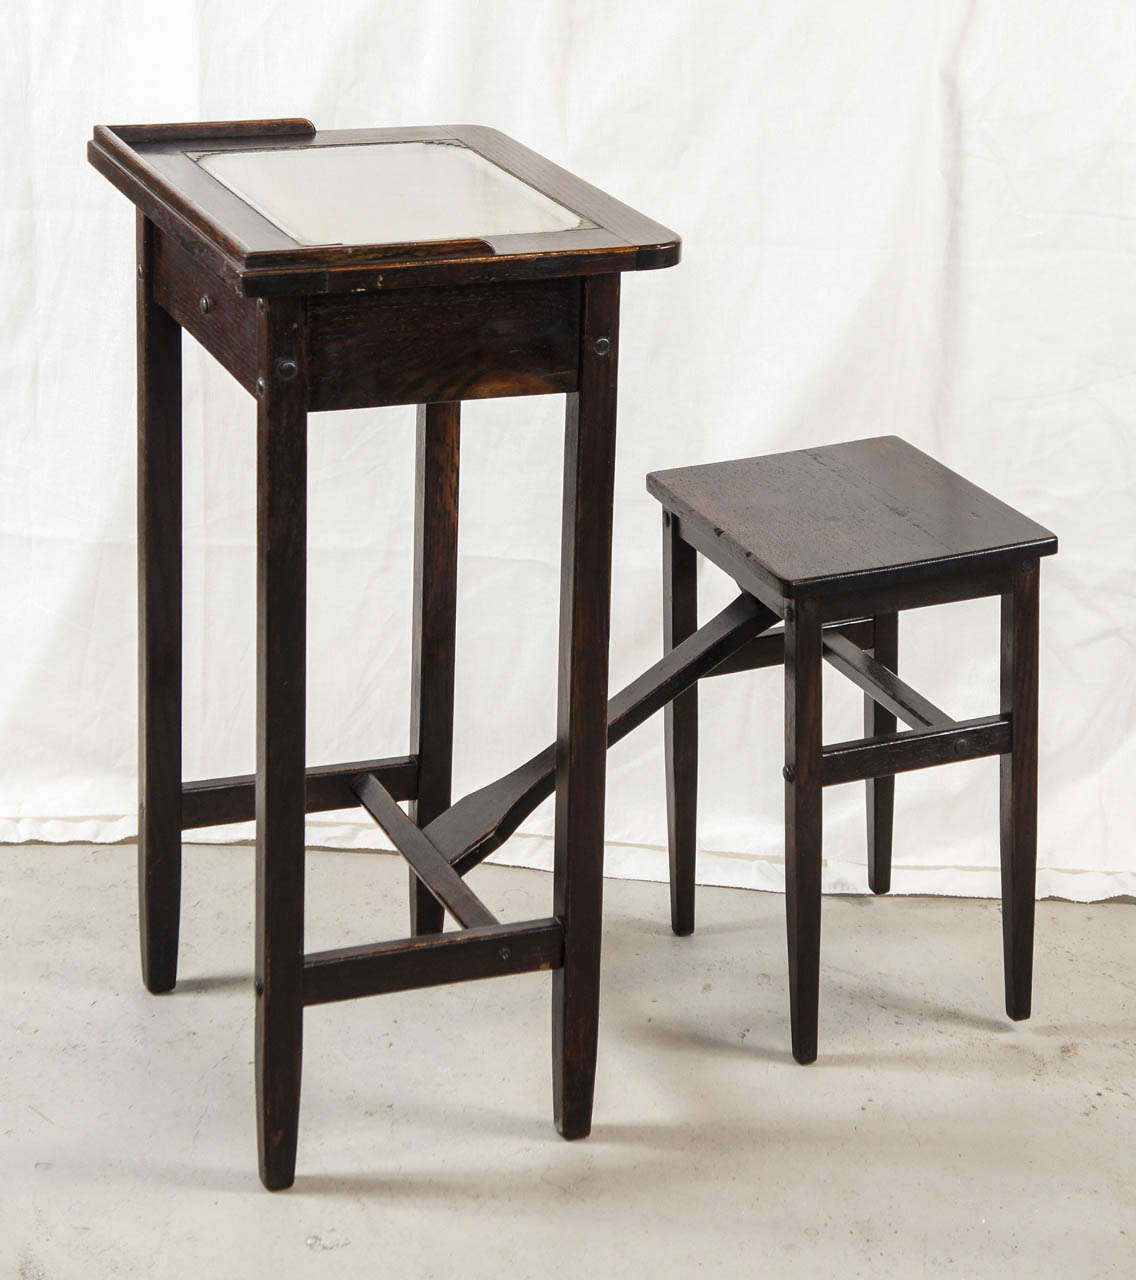 Early Cushman Table With Seat For Sale At 1stdibs